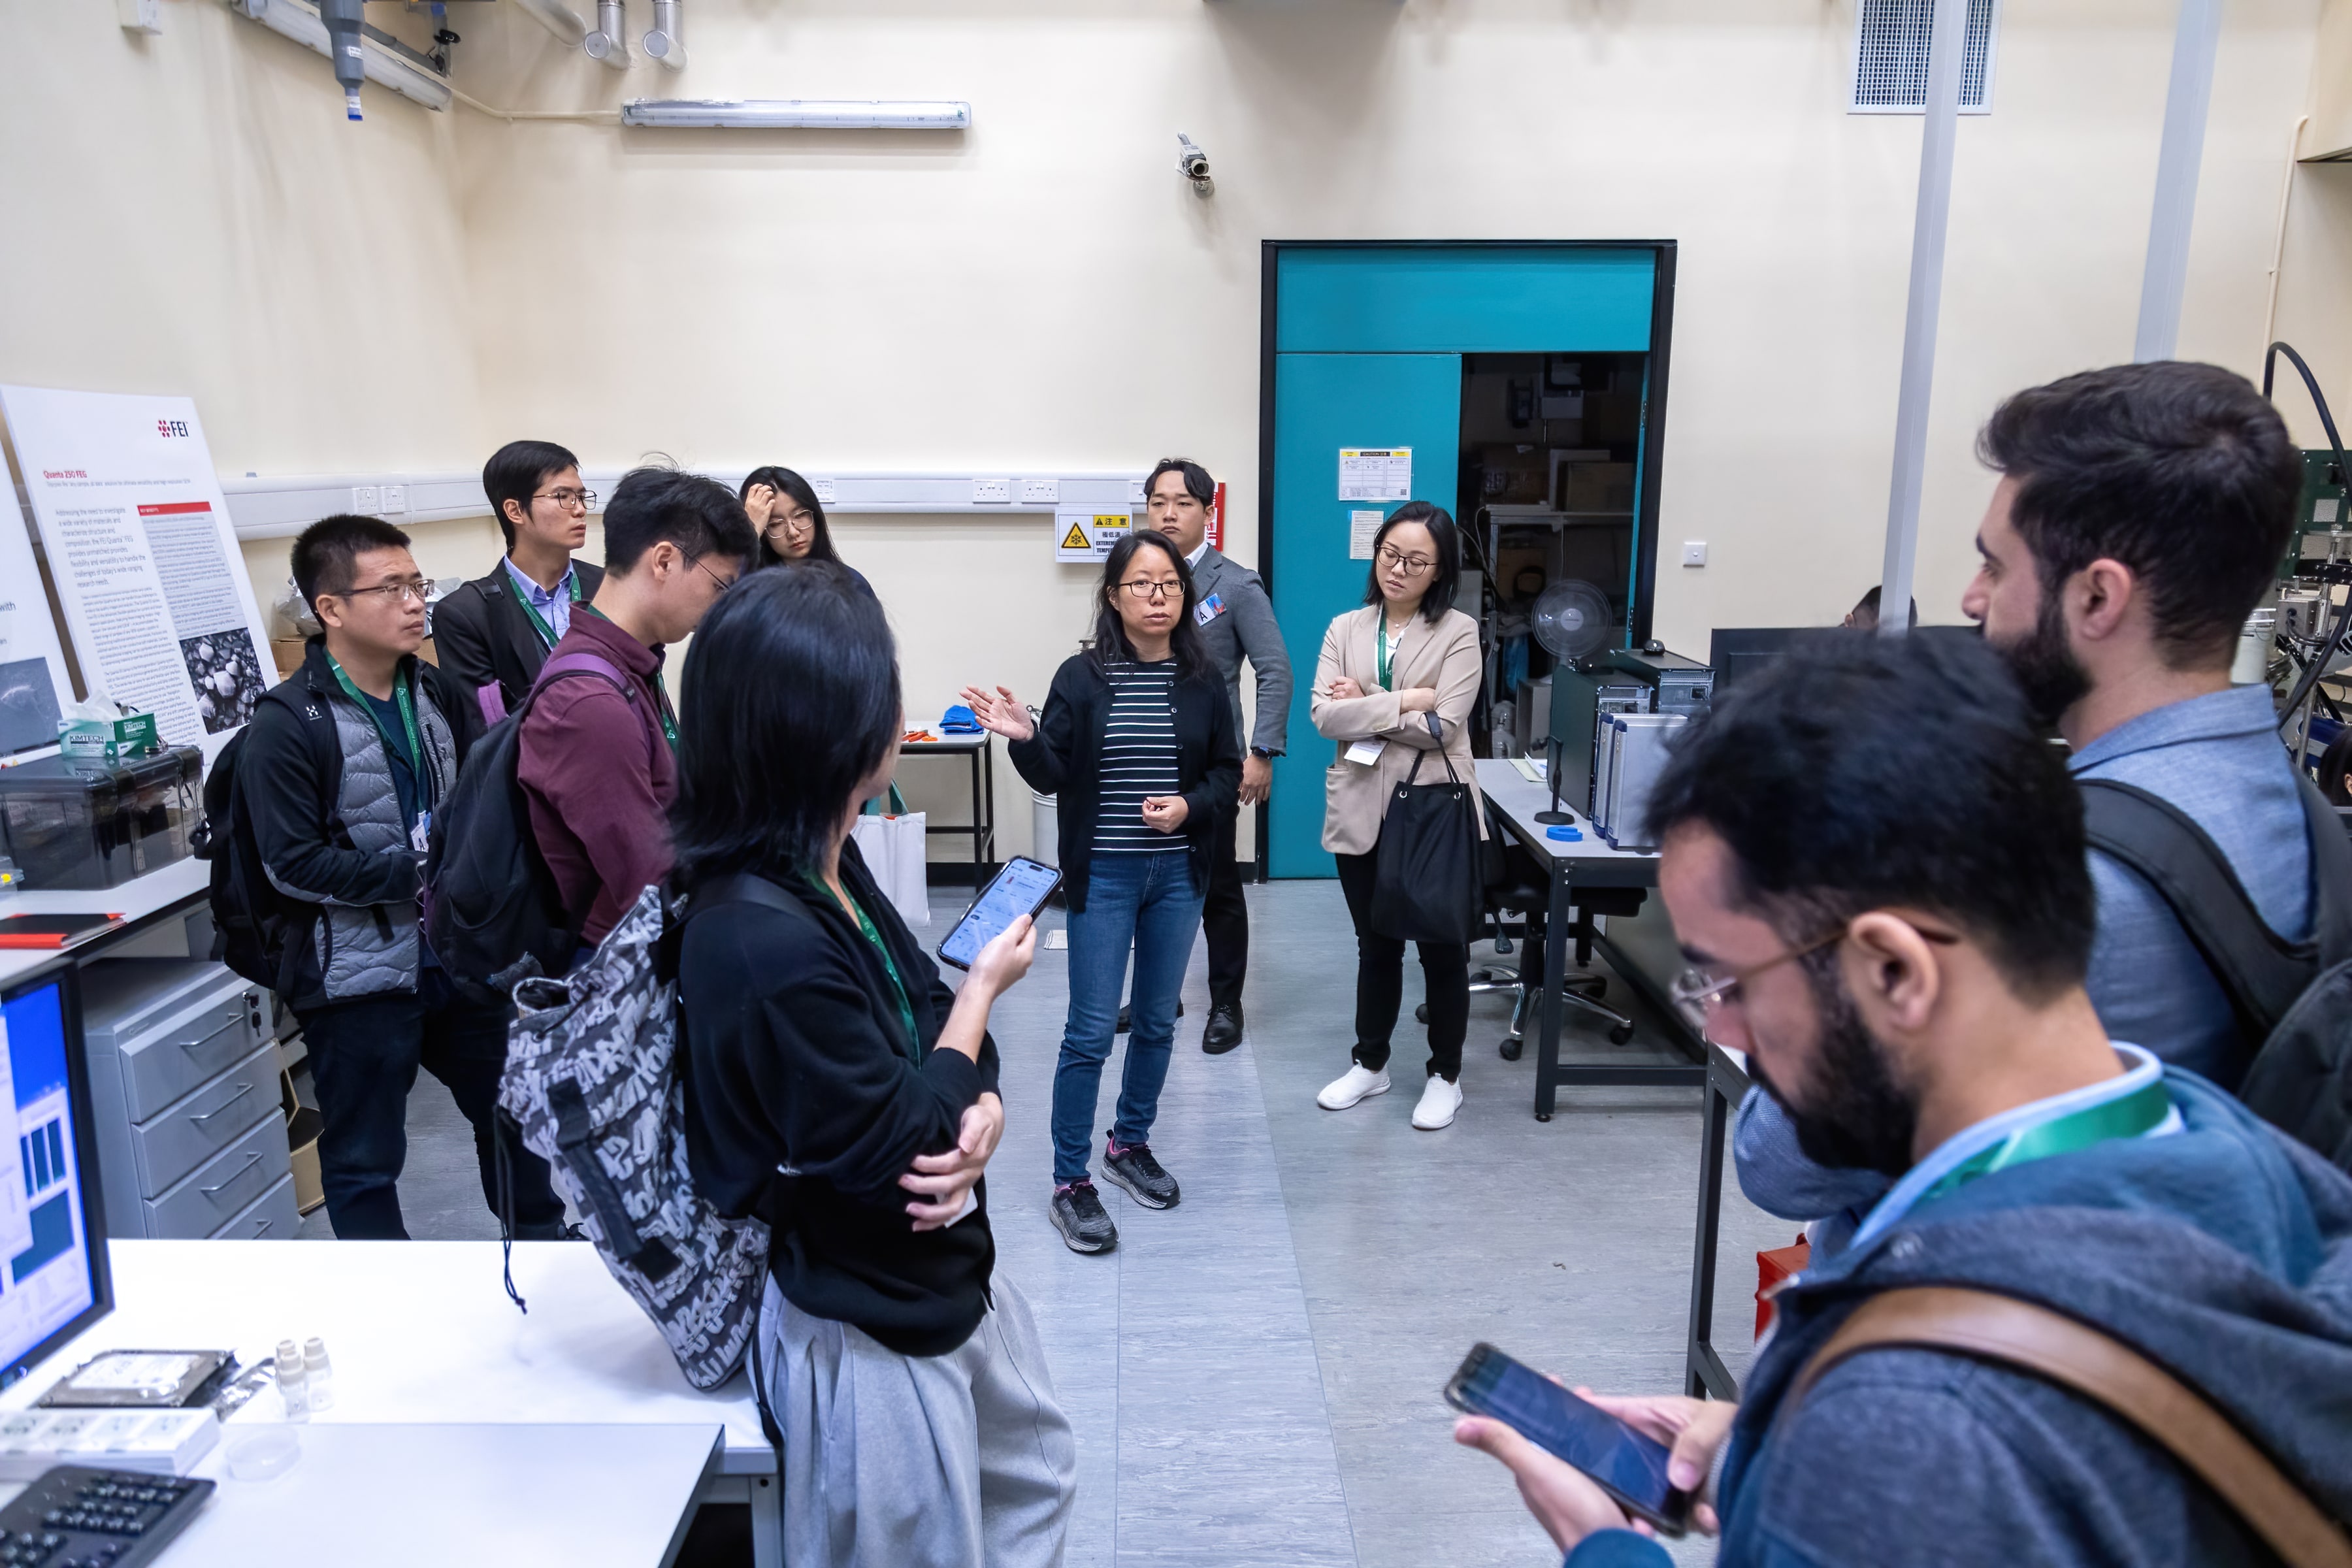 The young scientists had the opportunity to explore the Materials Characterization and Preparation Facility and gain insight into how it serves academic researchers in the preparation, characterization, and analysis of various advanced materials. 